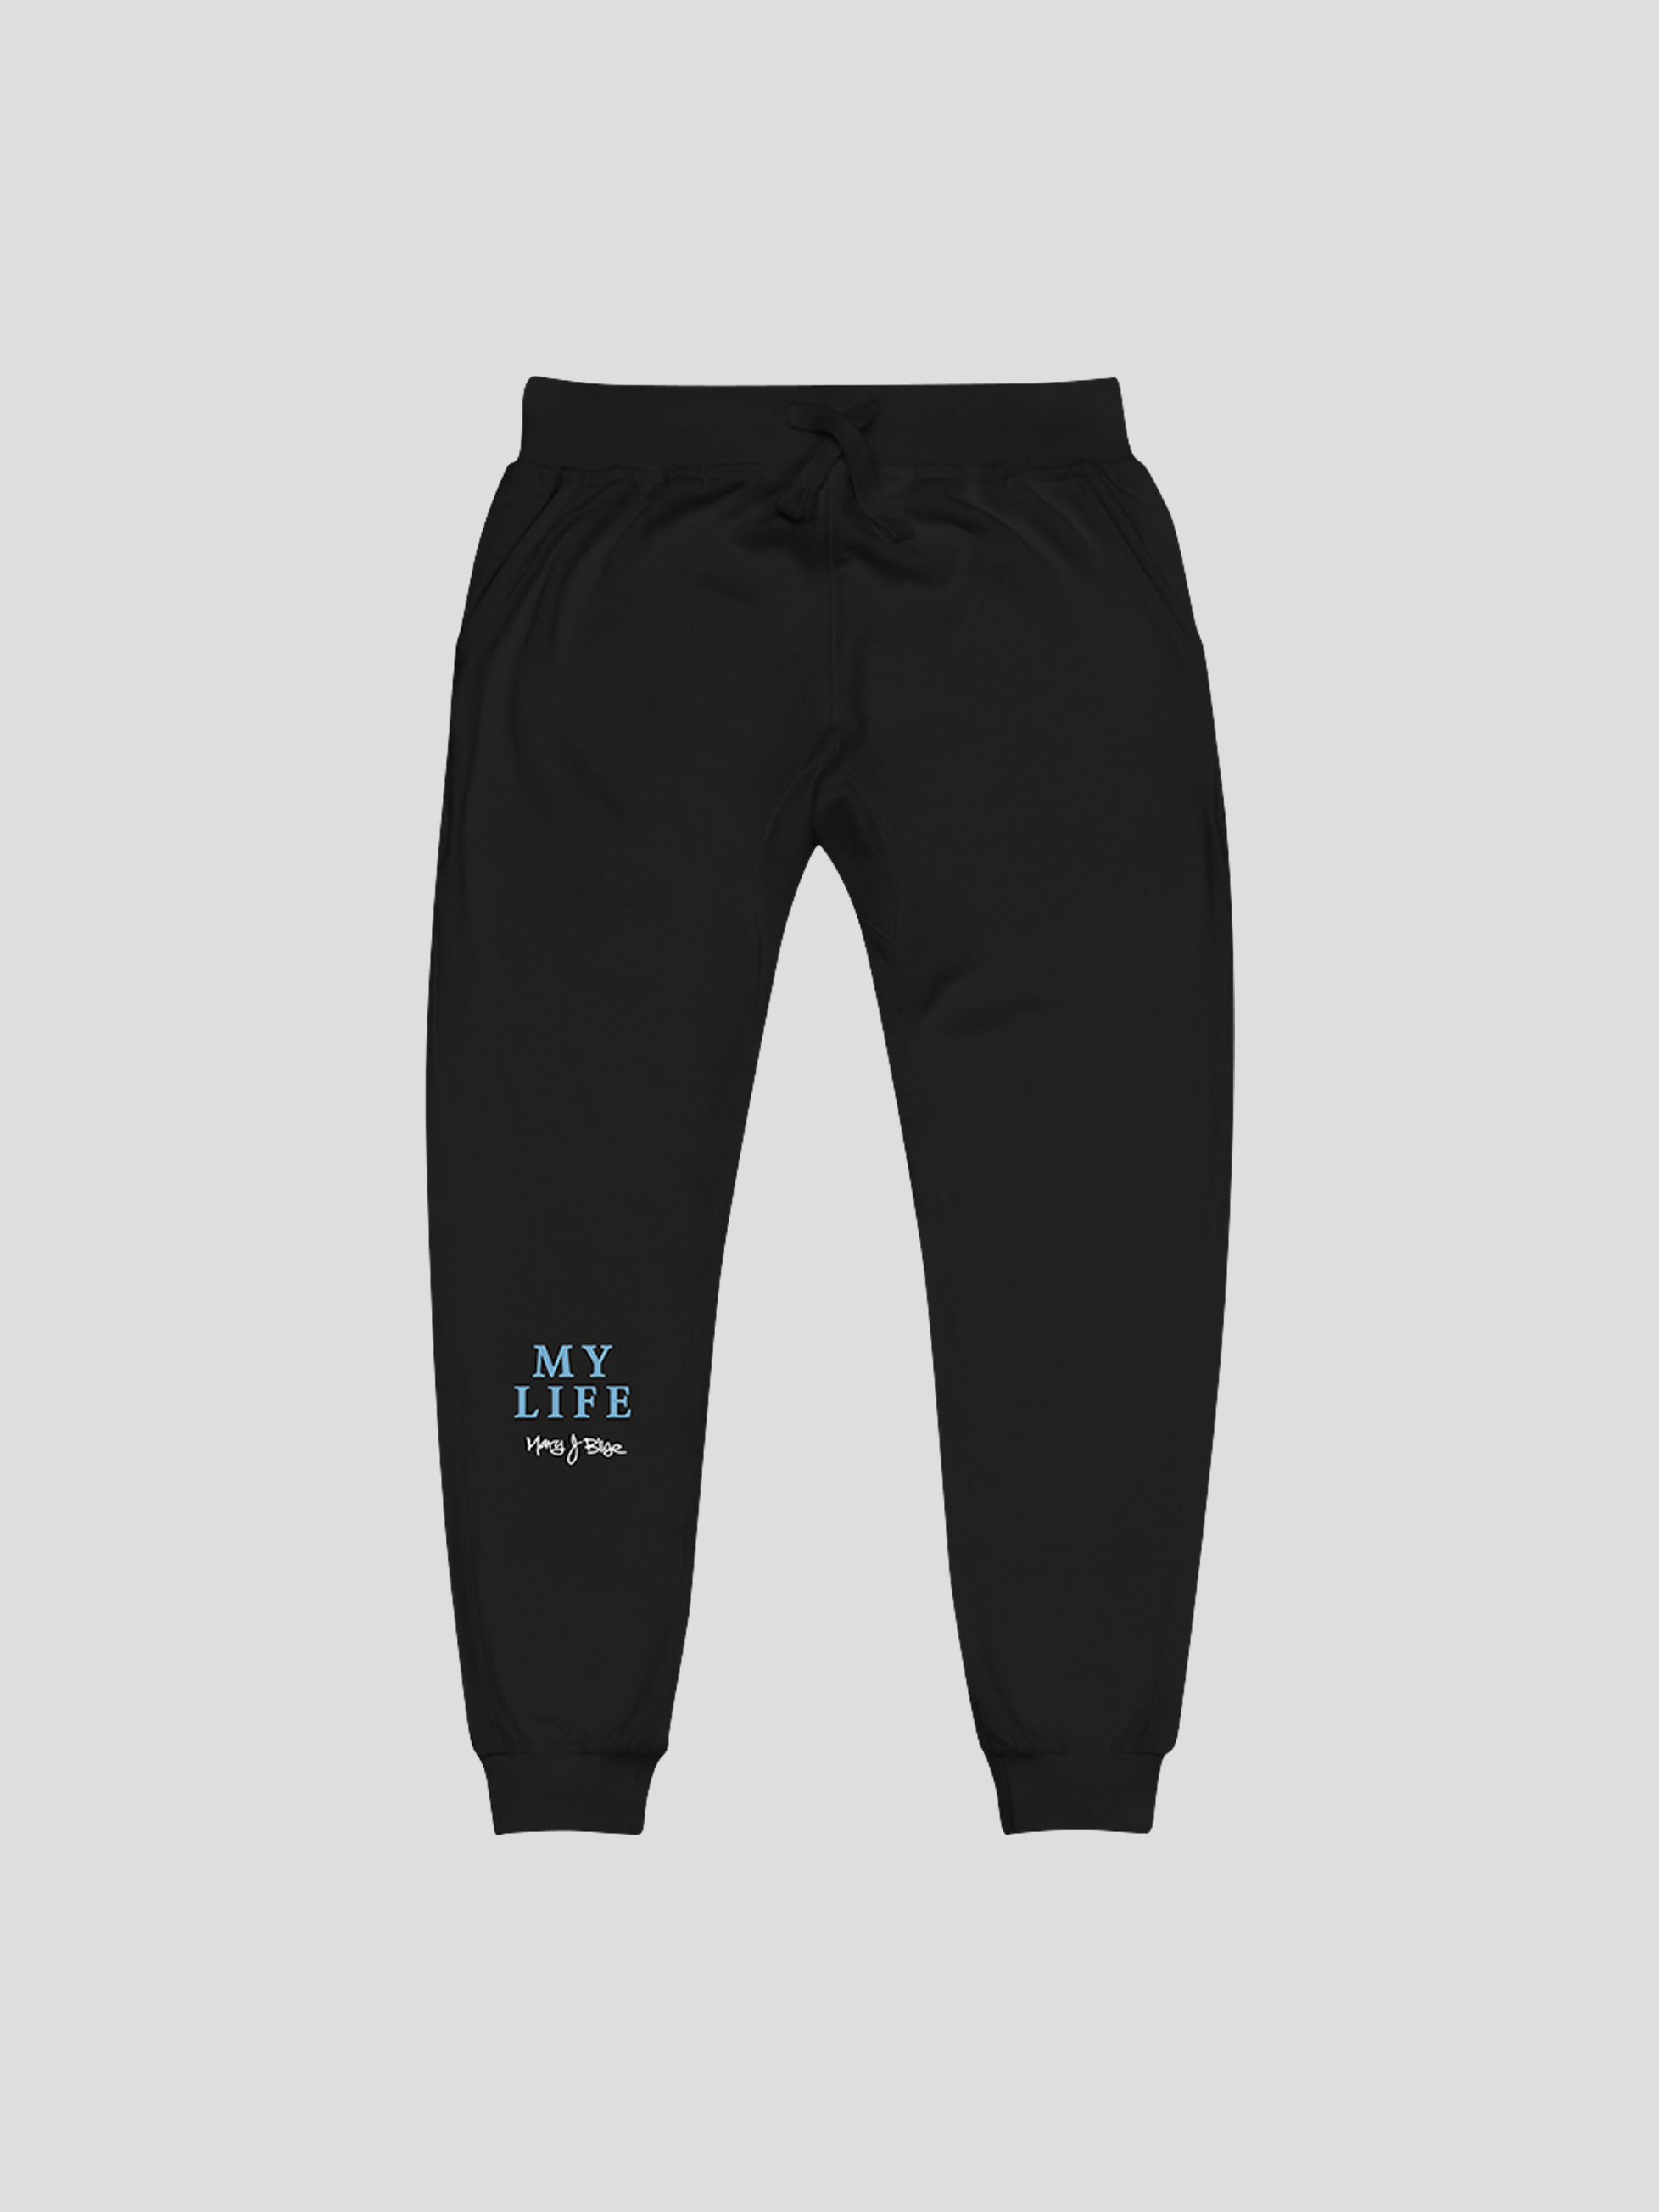 My Life Sweatpants - Mary J. Blige Official Store